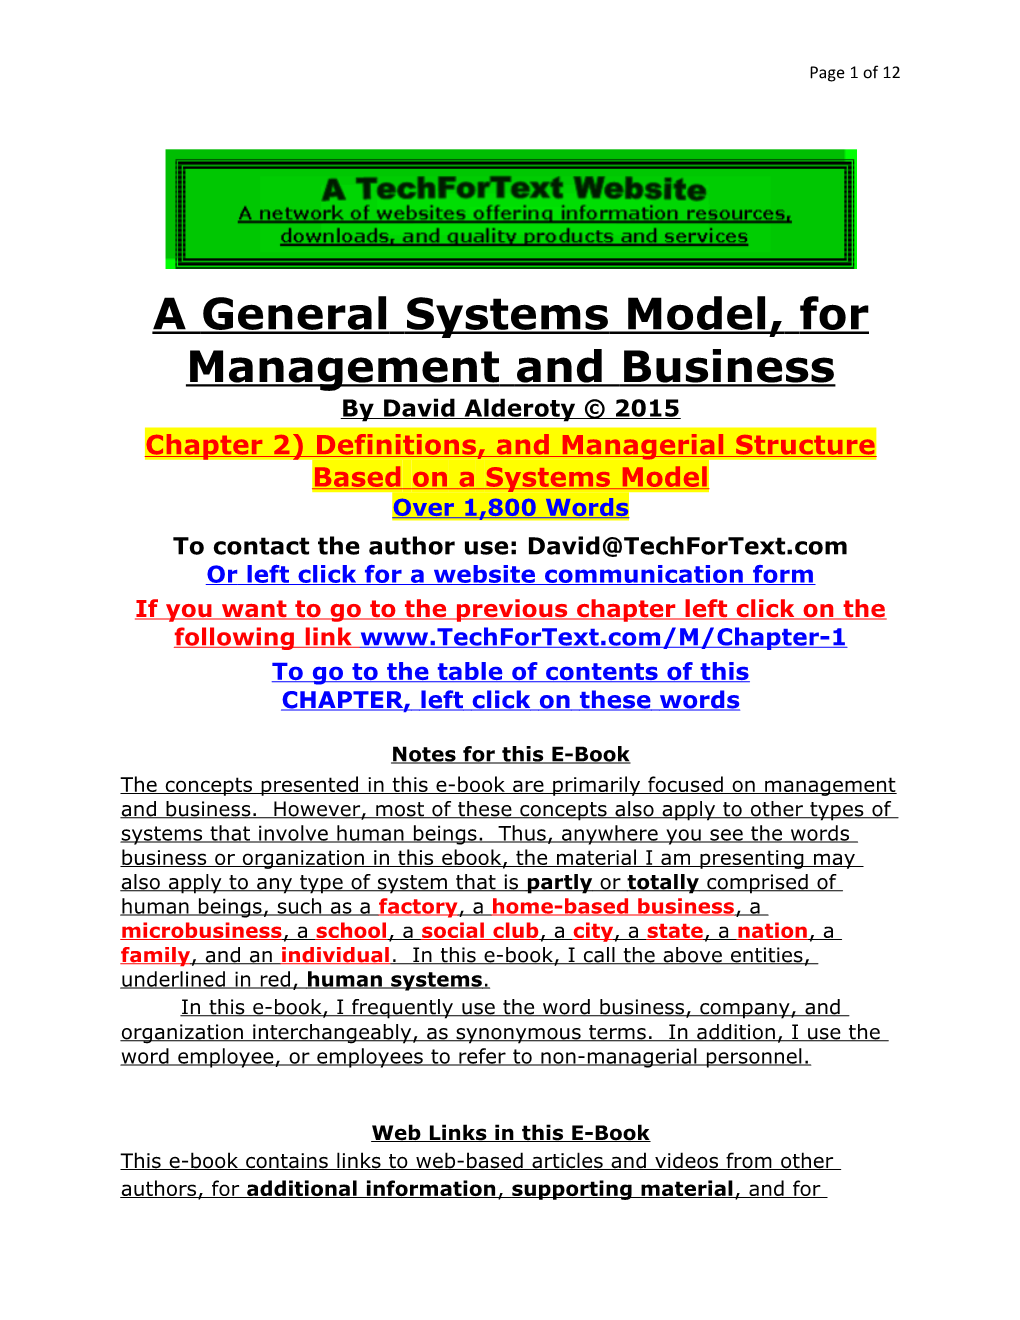 Definitions, and Managerial Structure Based on a Systems Model